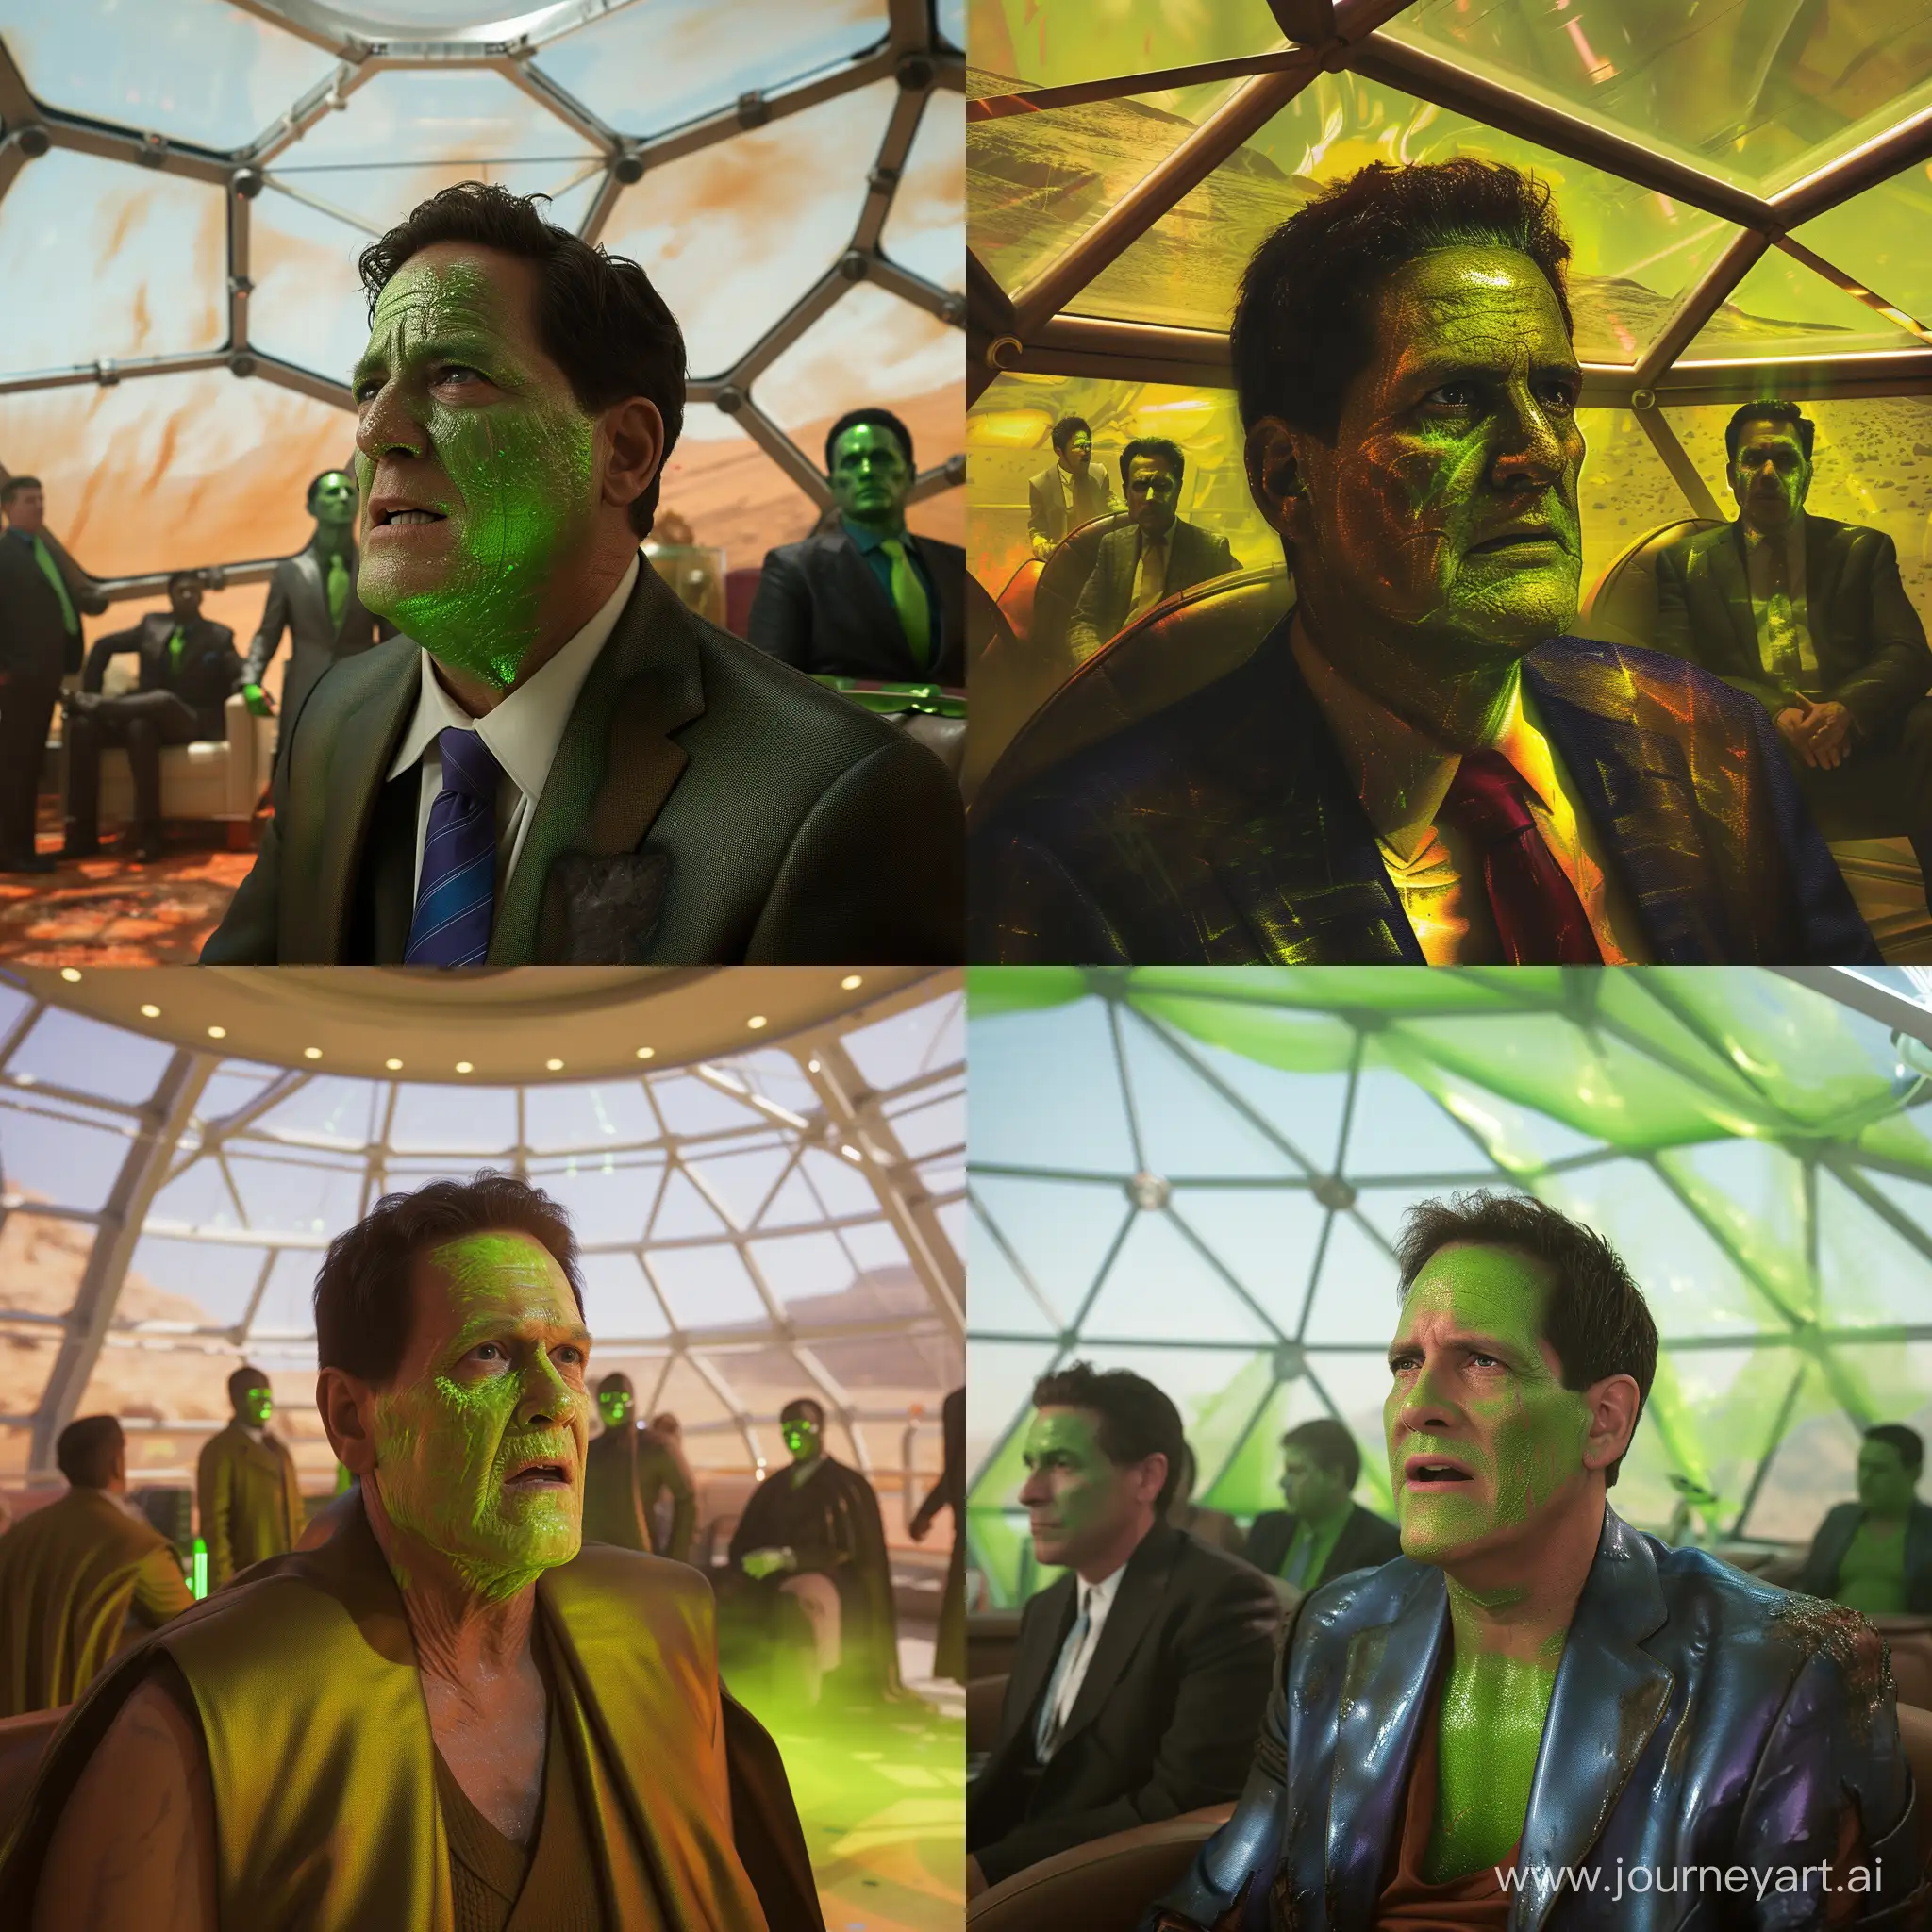 50s Sci-fi style. Sickly and scared Mark Cuban  with bright green skin. Inside an executive lounge in a glass dome on mars. Other billionaires with green skin in the background.